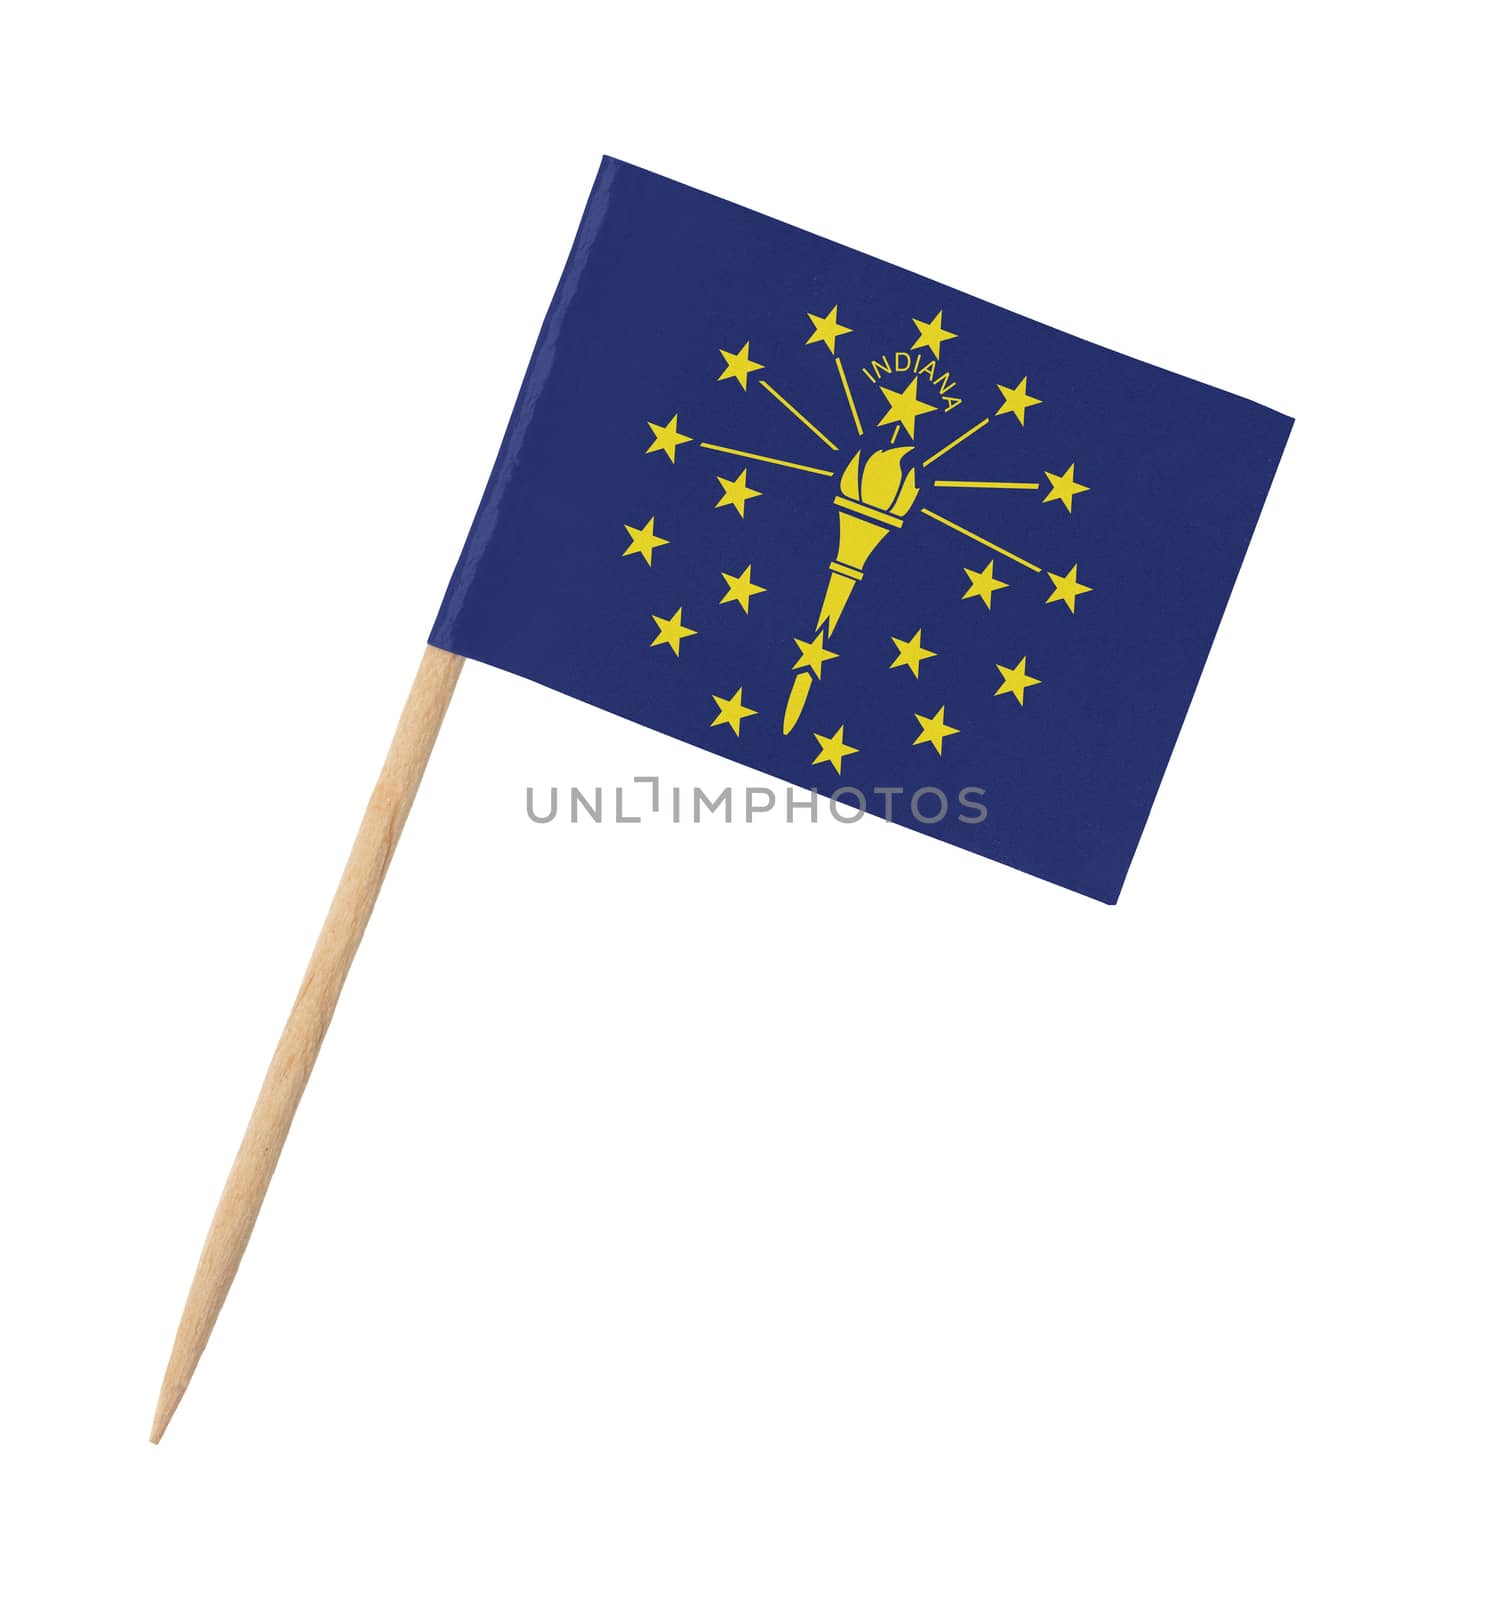 Small paper US-state flag on wooden stick - Indiana - Isolated on white